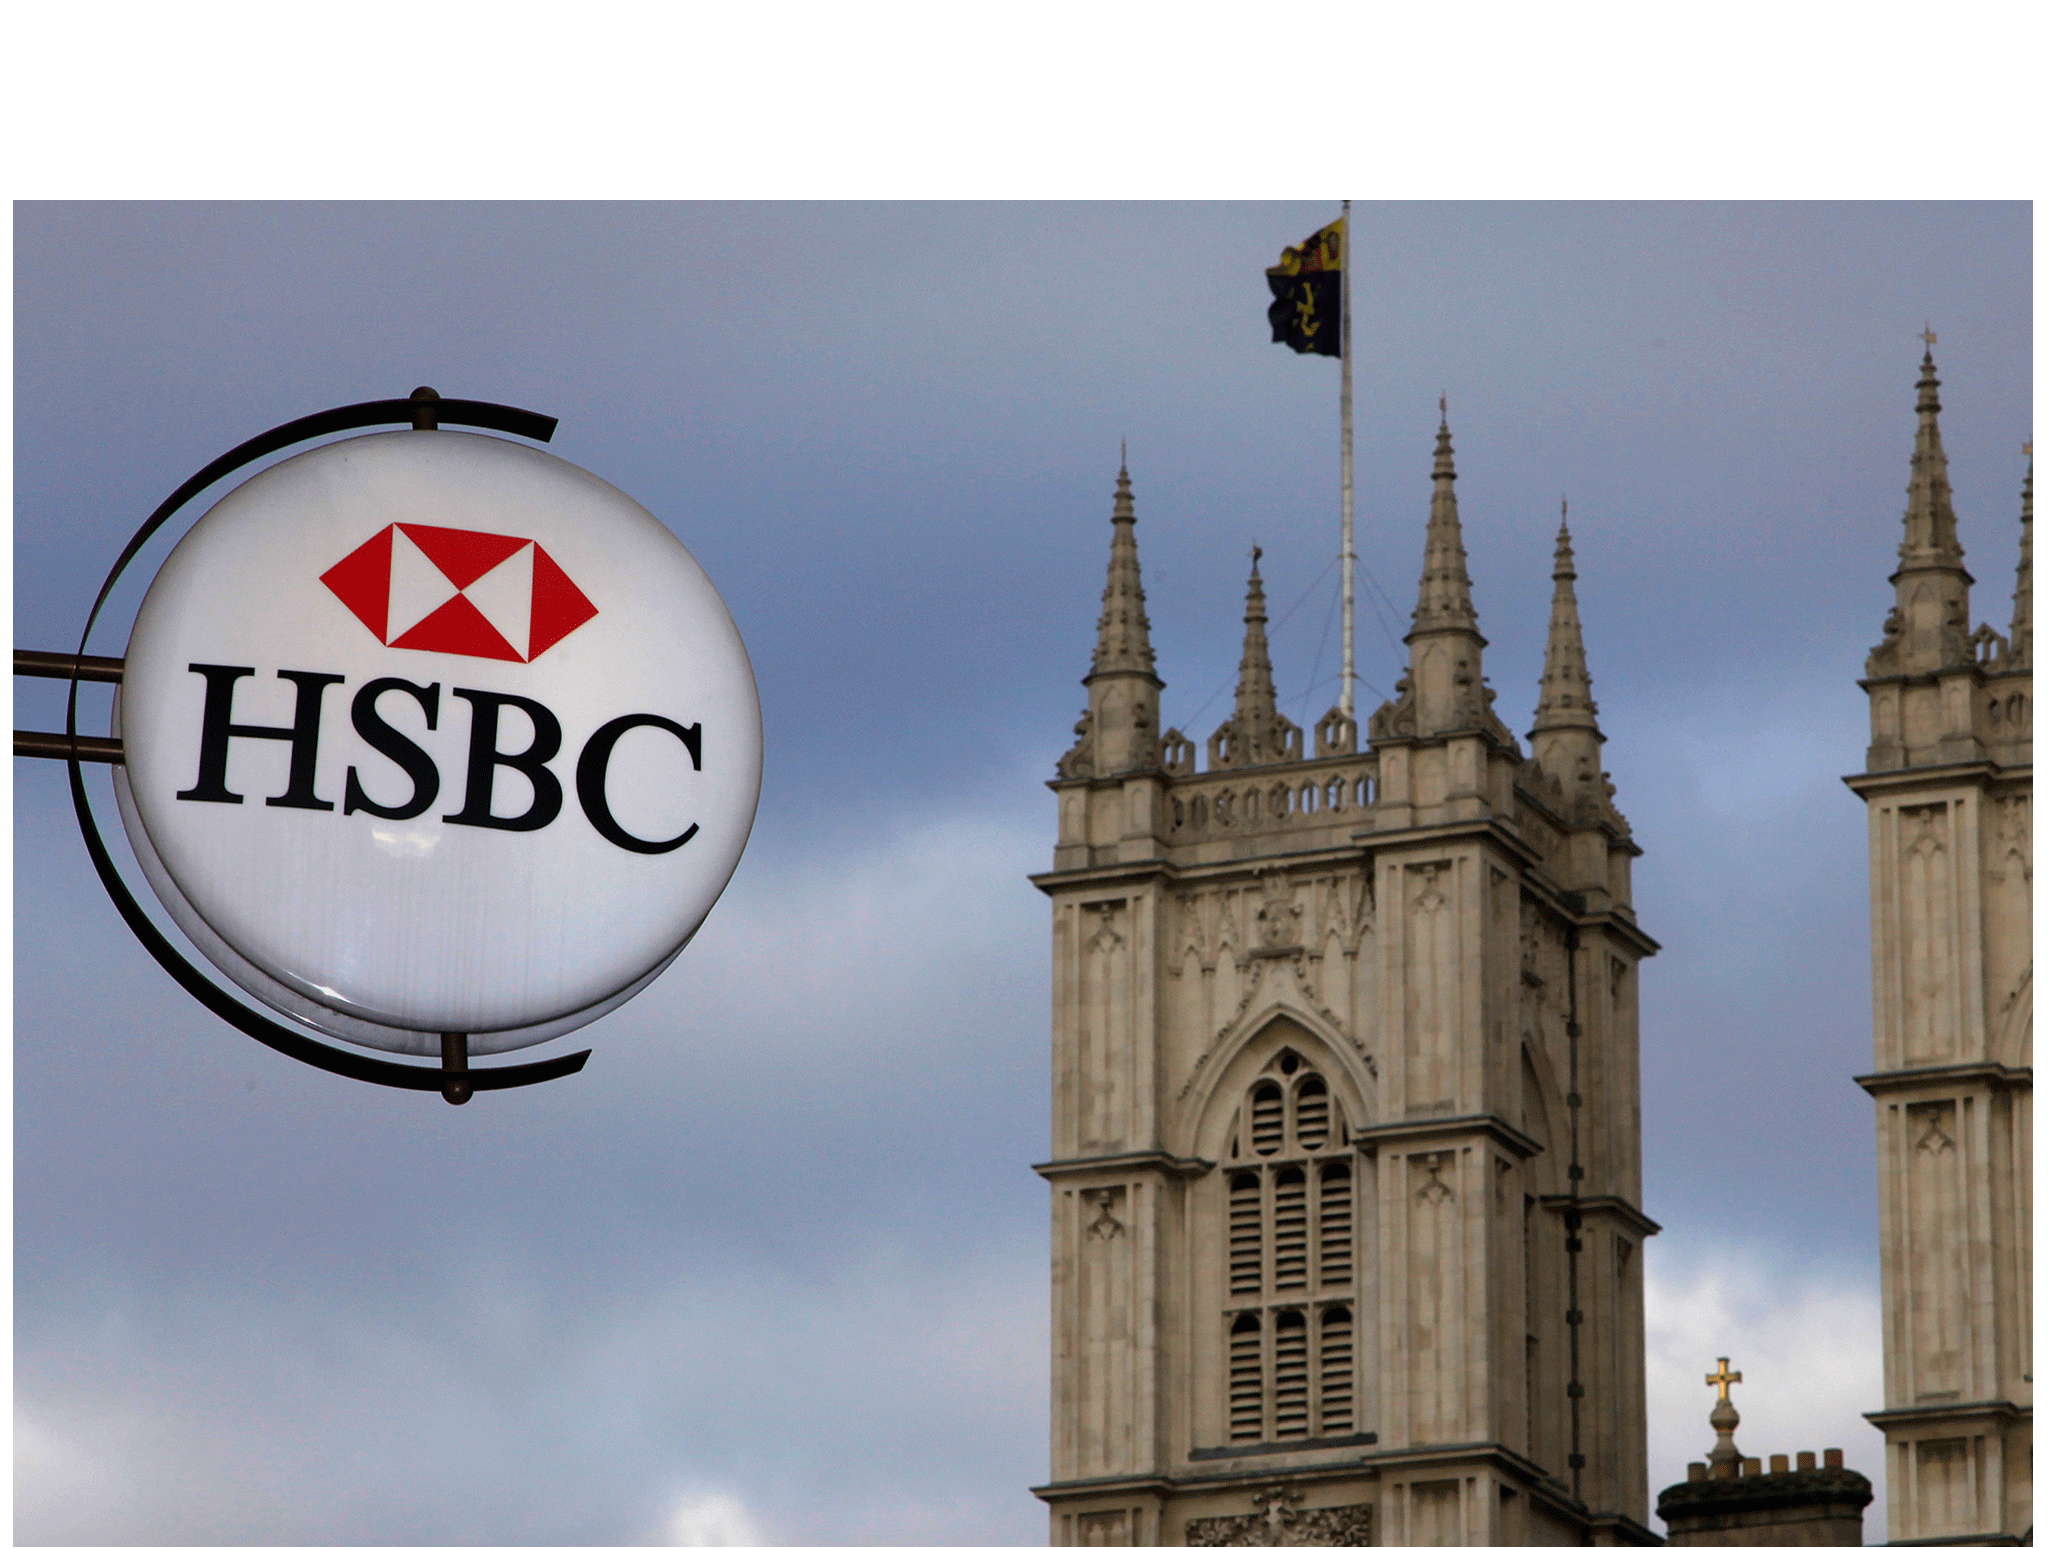 ‘We have used Bell Pottinger for specific projects in the past but will not be doing so in the future,’ a HSBC spokesperson said